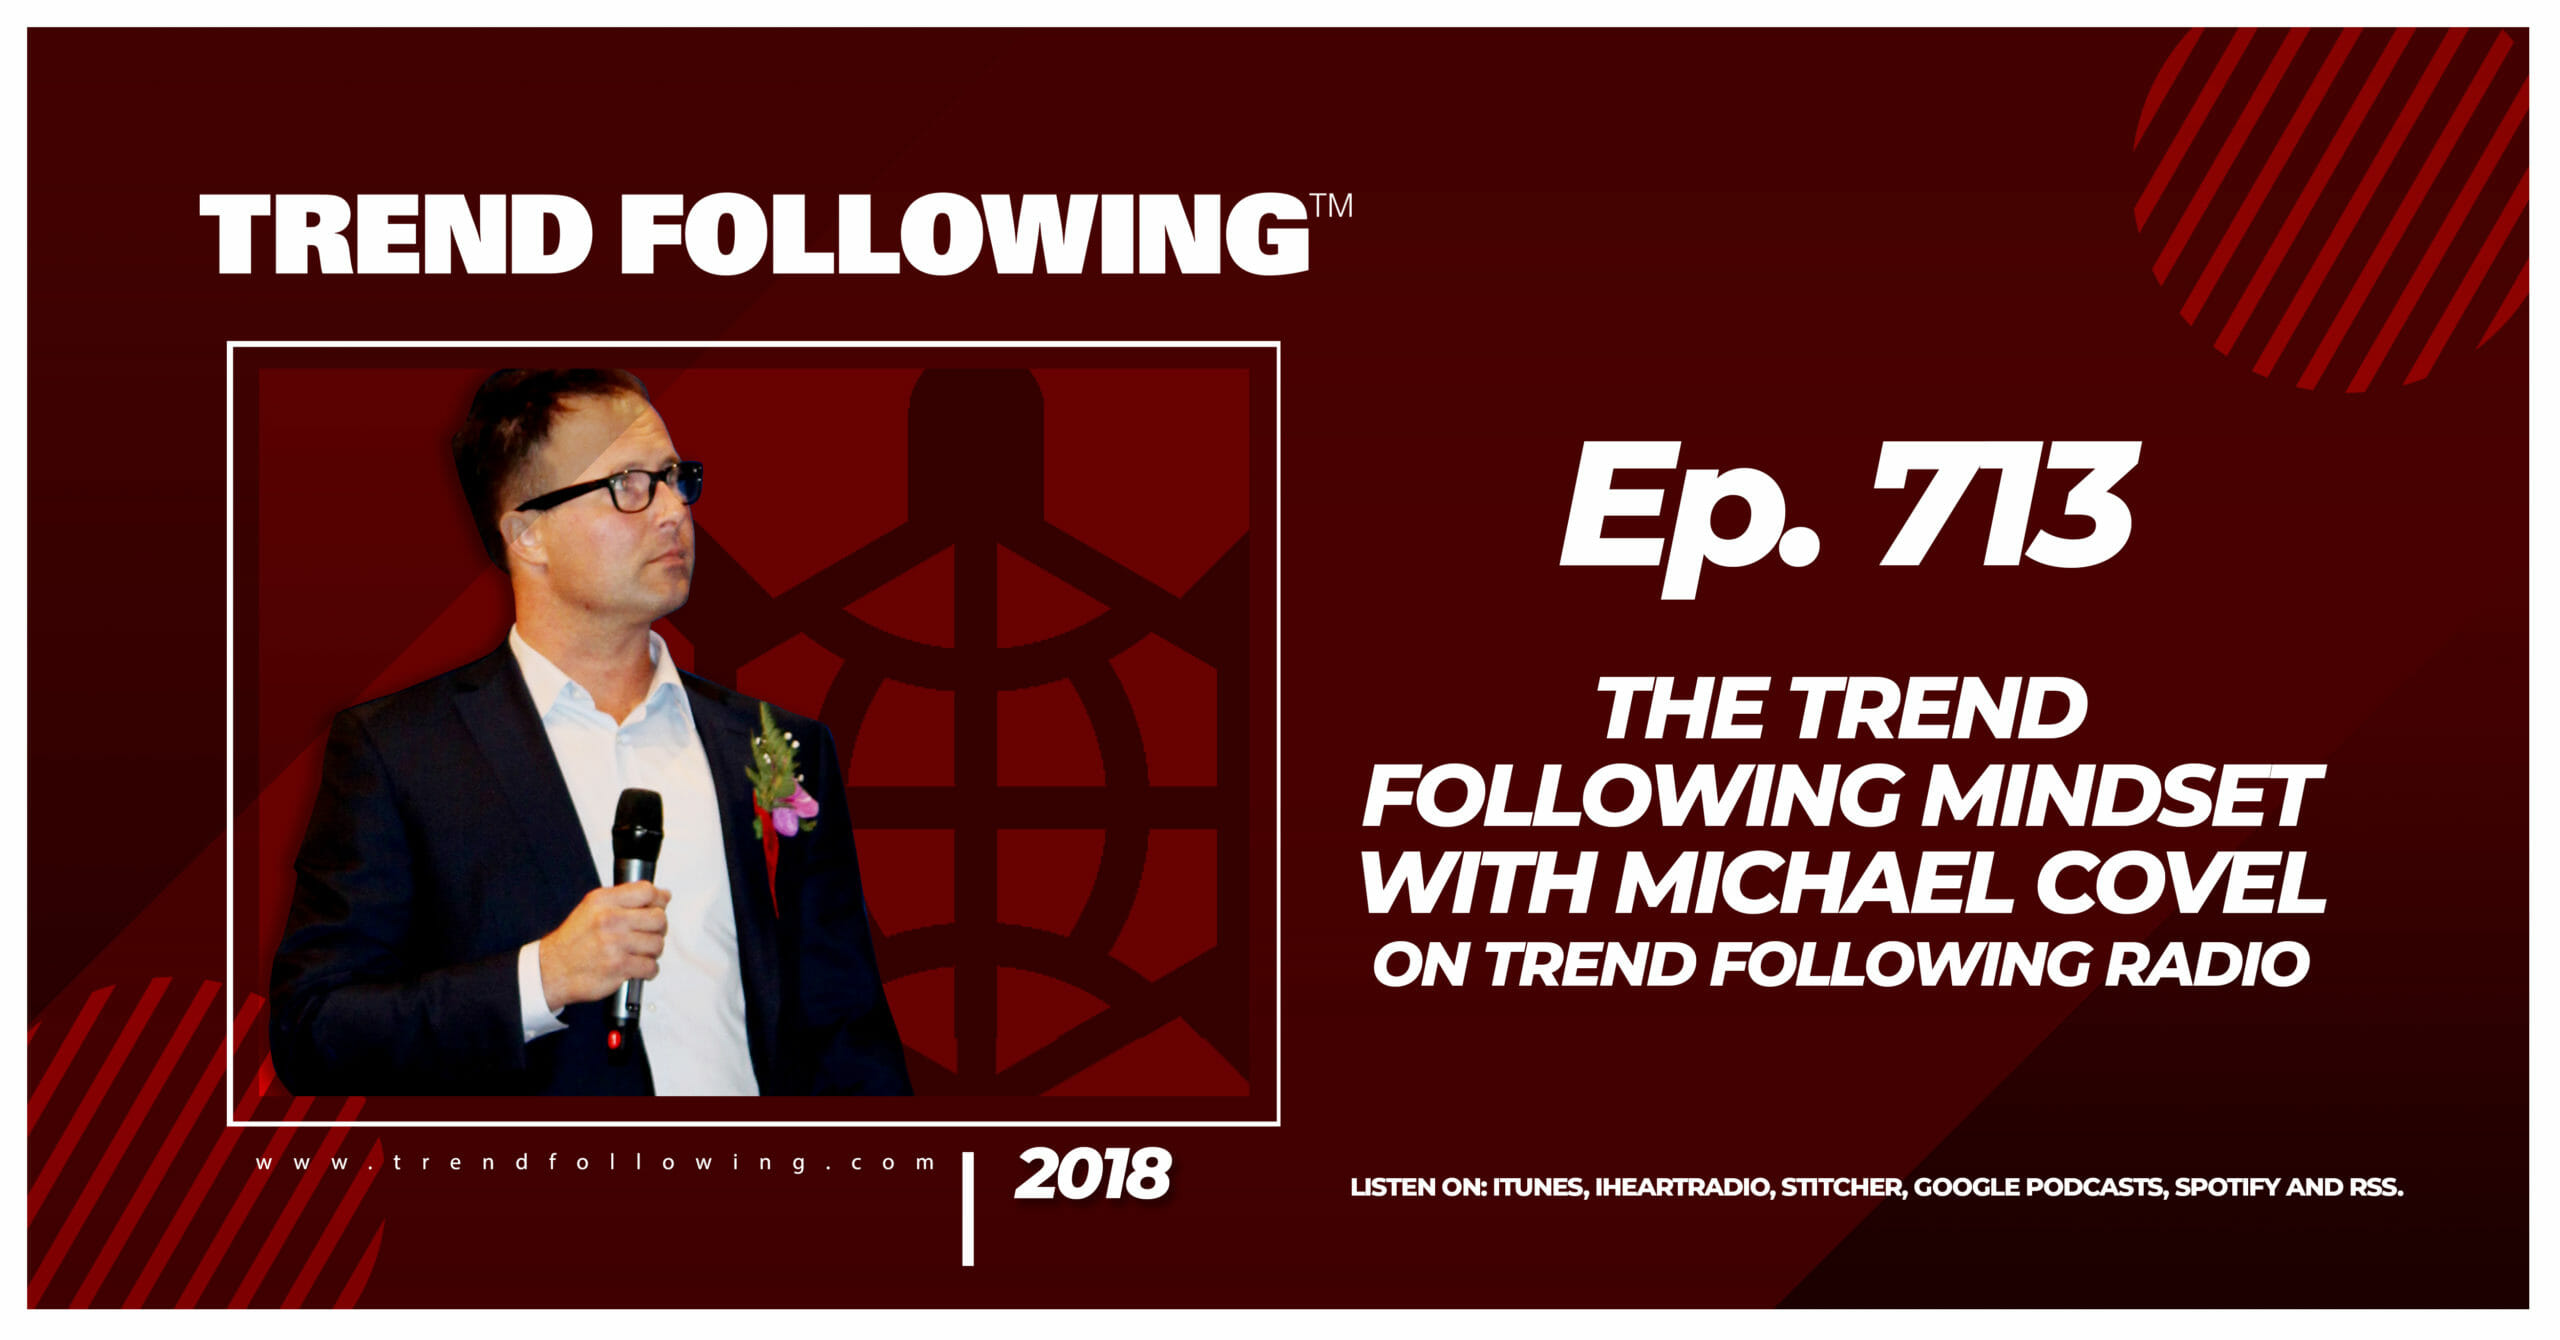 The Trend Following Mindset with Michael Covel on Trend Following Radio